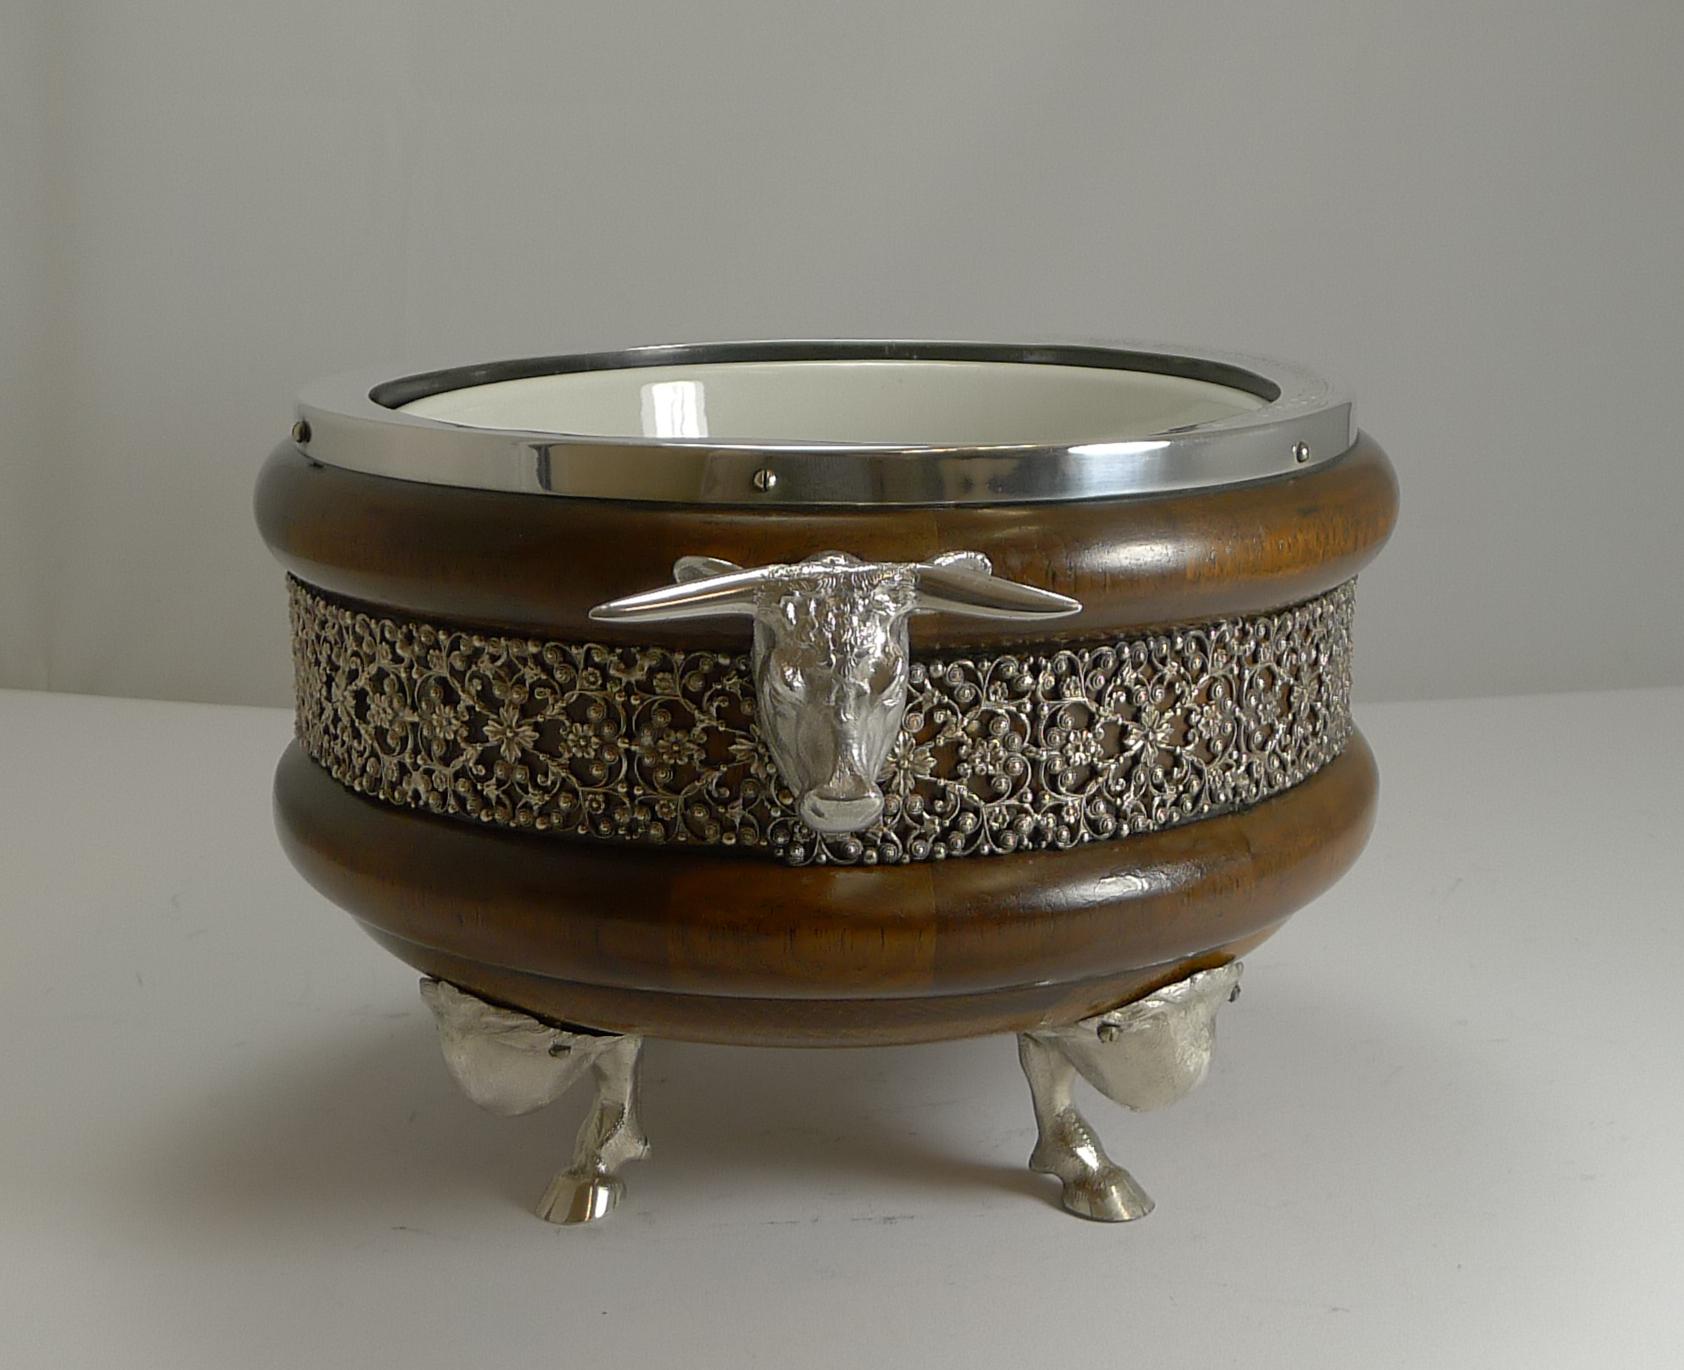 Late 19th Century Rare Novelty English Figural Oak and Silver Plate Salad Bowl - Bull, 1888